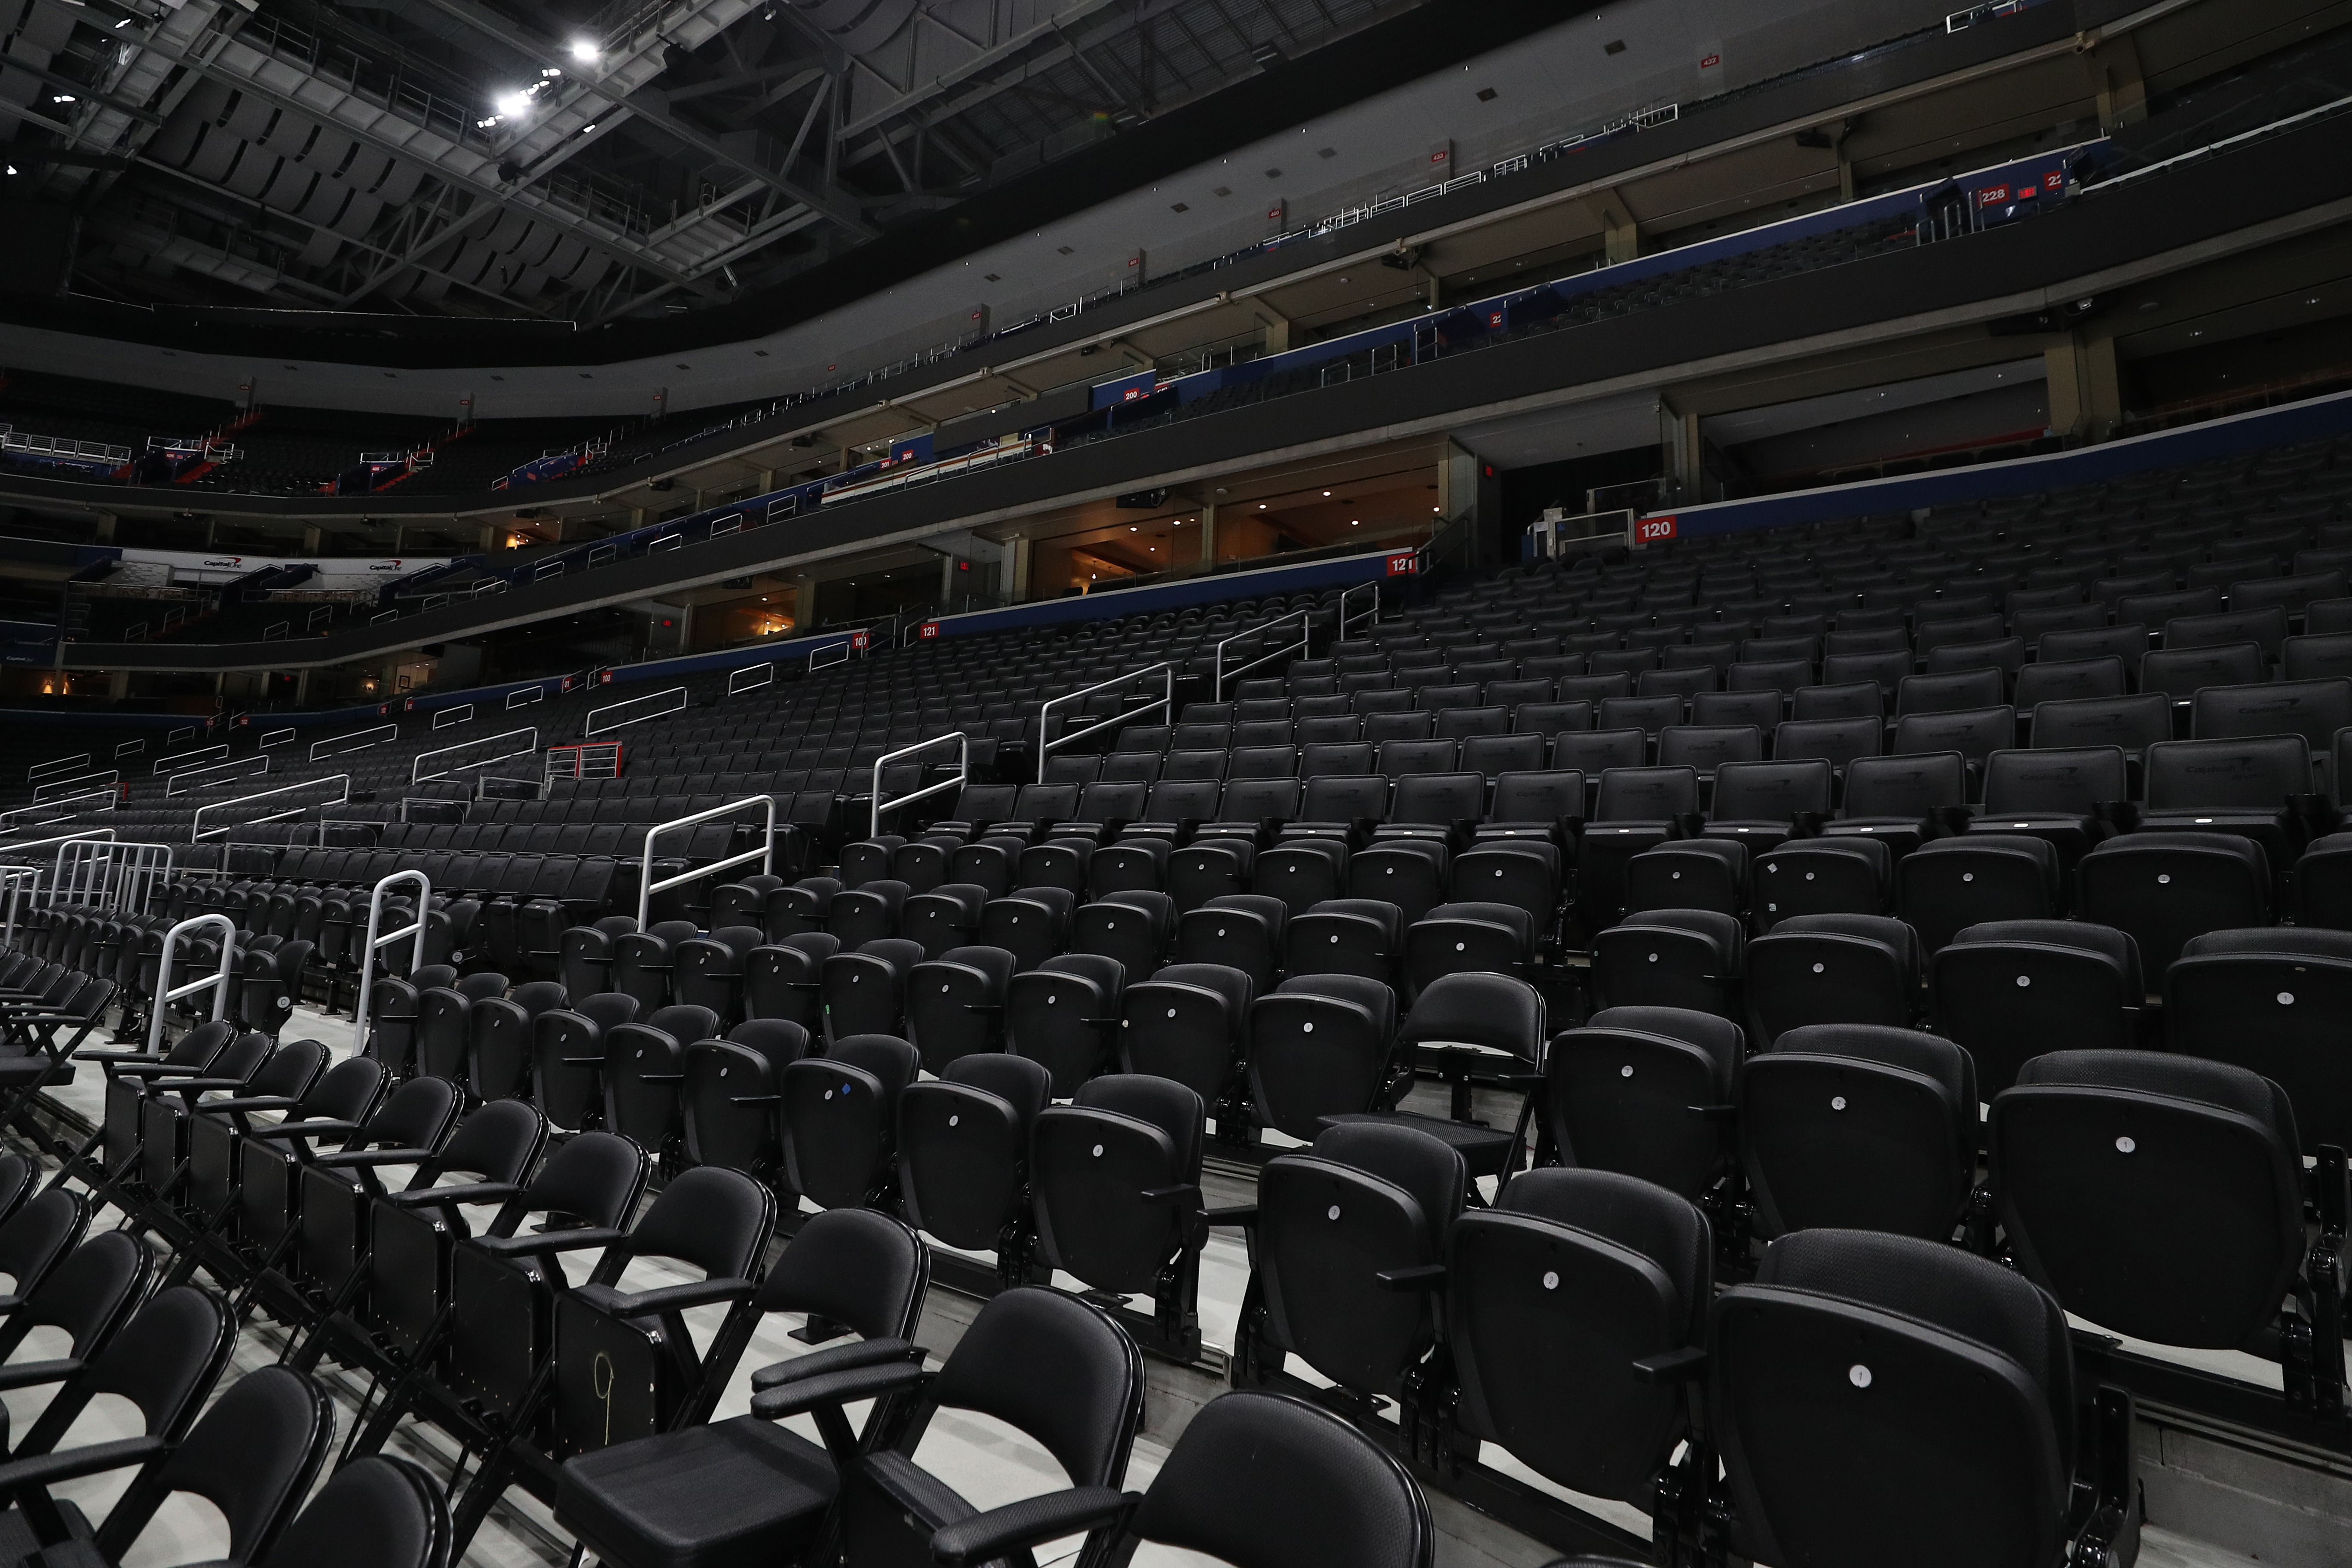 Spectator seating is empty prior to the Detroit Red Wings playing against the Washington Capitals at Capital One Arena on March 12, 2020 in Washington, DC. Yesterday, the NBA suspended their season until further notice after a Utah Jazz player tested positive for the coronavirus (COVID-19). The NHL said per a release, that the uncertainty regarding next steps regarding the coronavirus, Clubs were advised not to conduct morning skates, practices or team meetings today. (Photo by Patrick Smith/Getty Images)